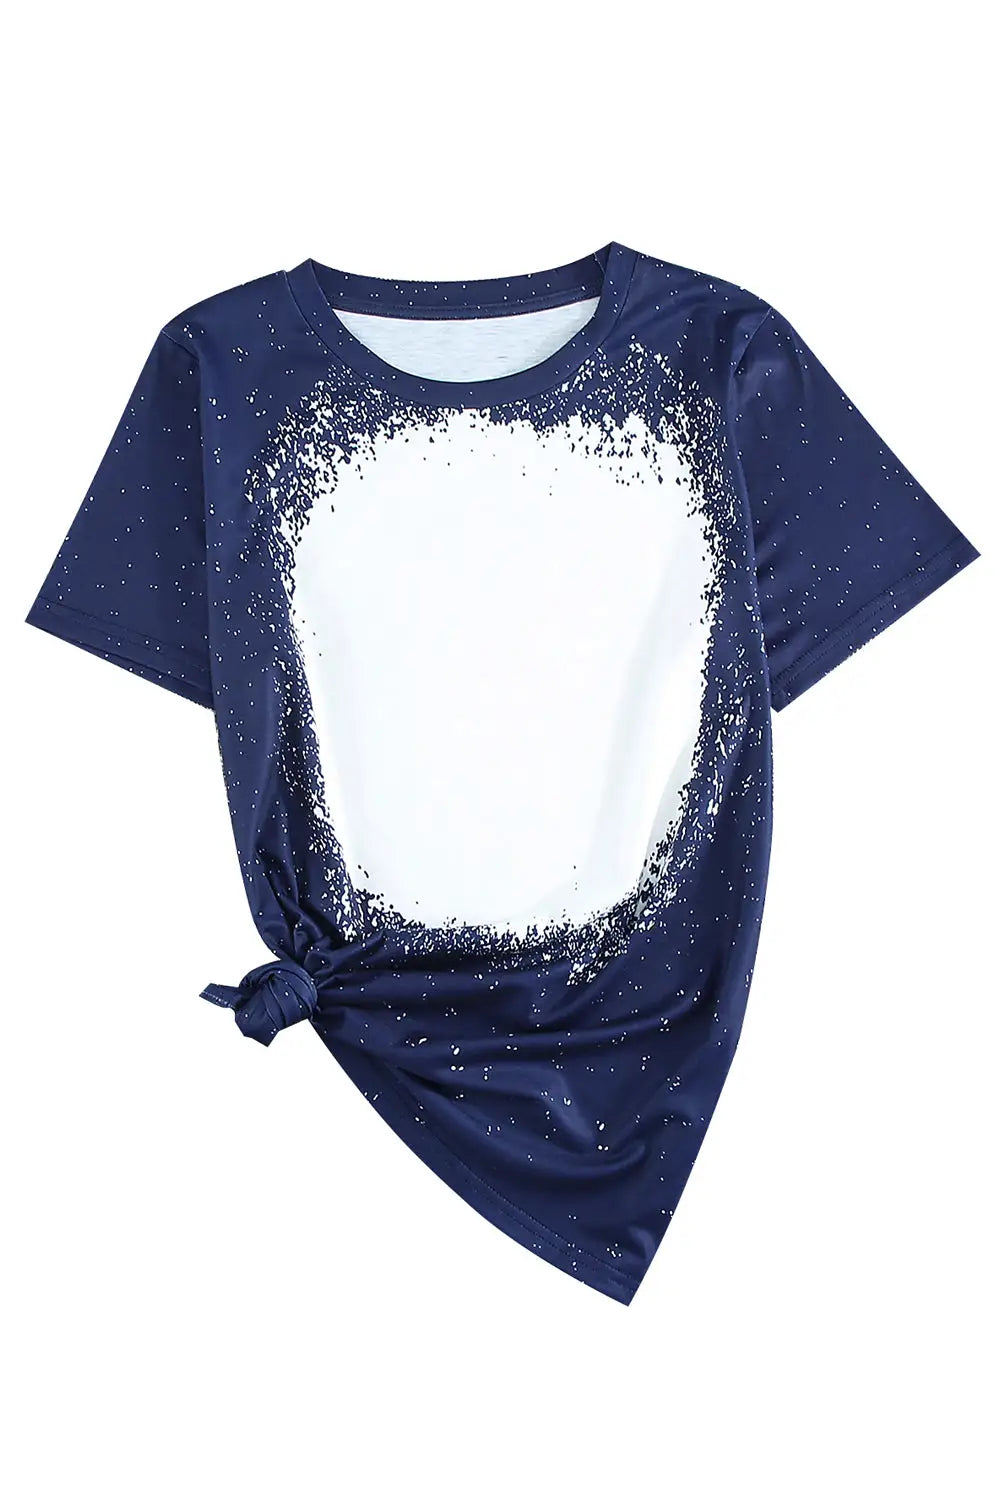 Navy tie-dyed round neck short sleeve t-shirt - tops